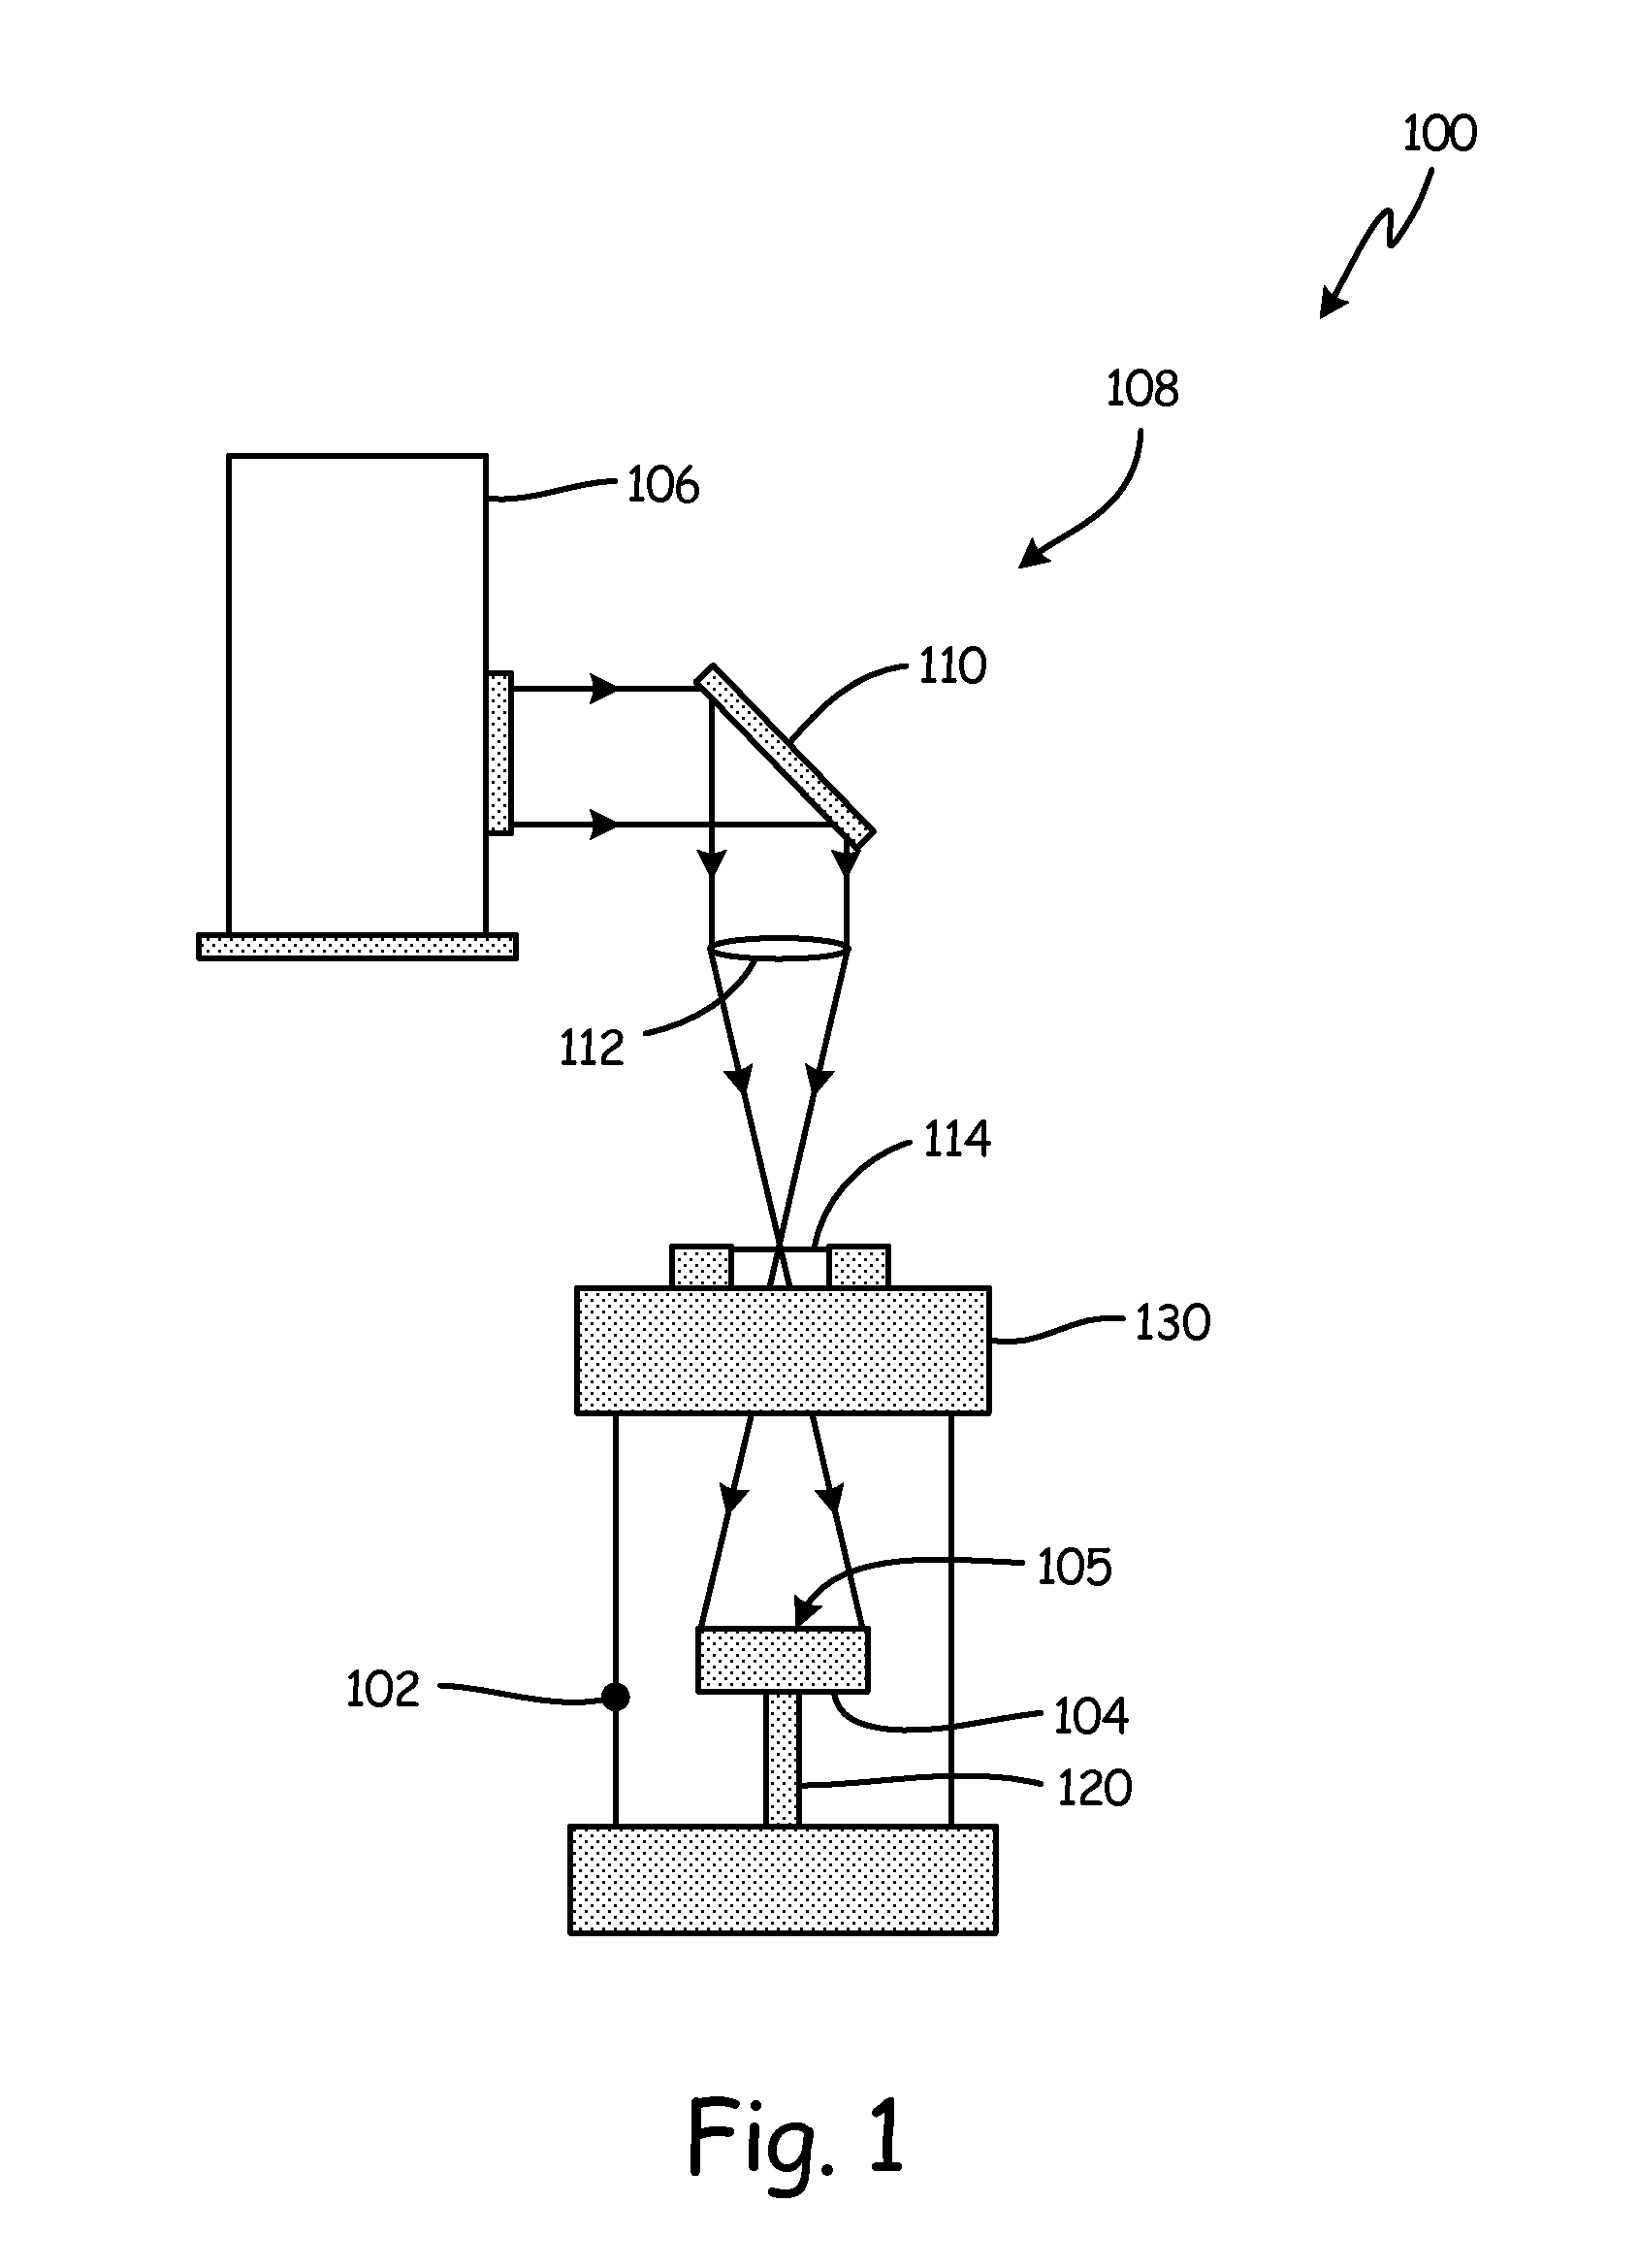 Method and apparatus for controlled dopant incorporation and activation in a chemical vapor deposition system